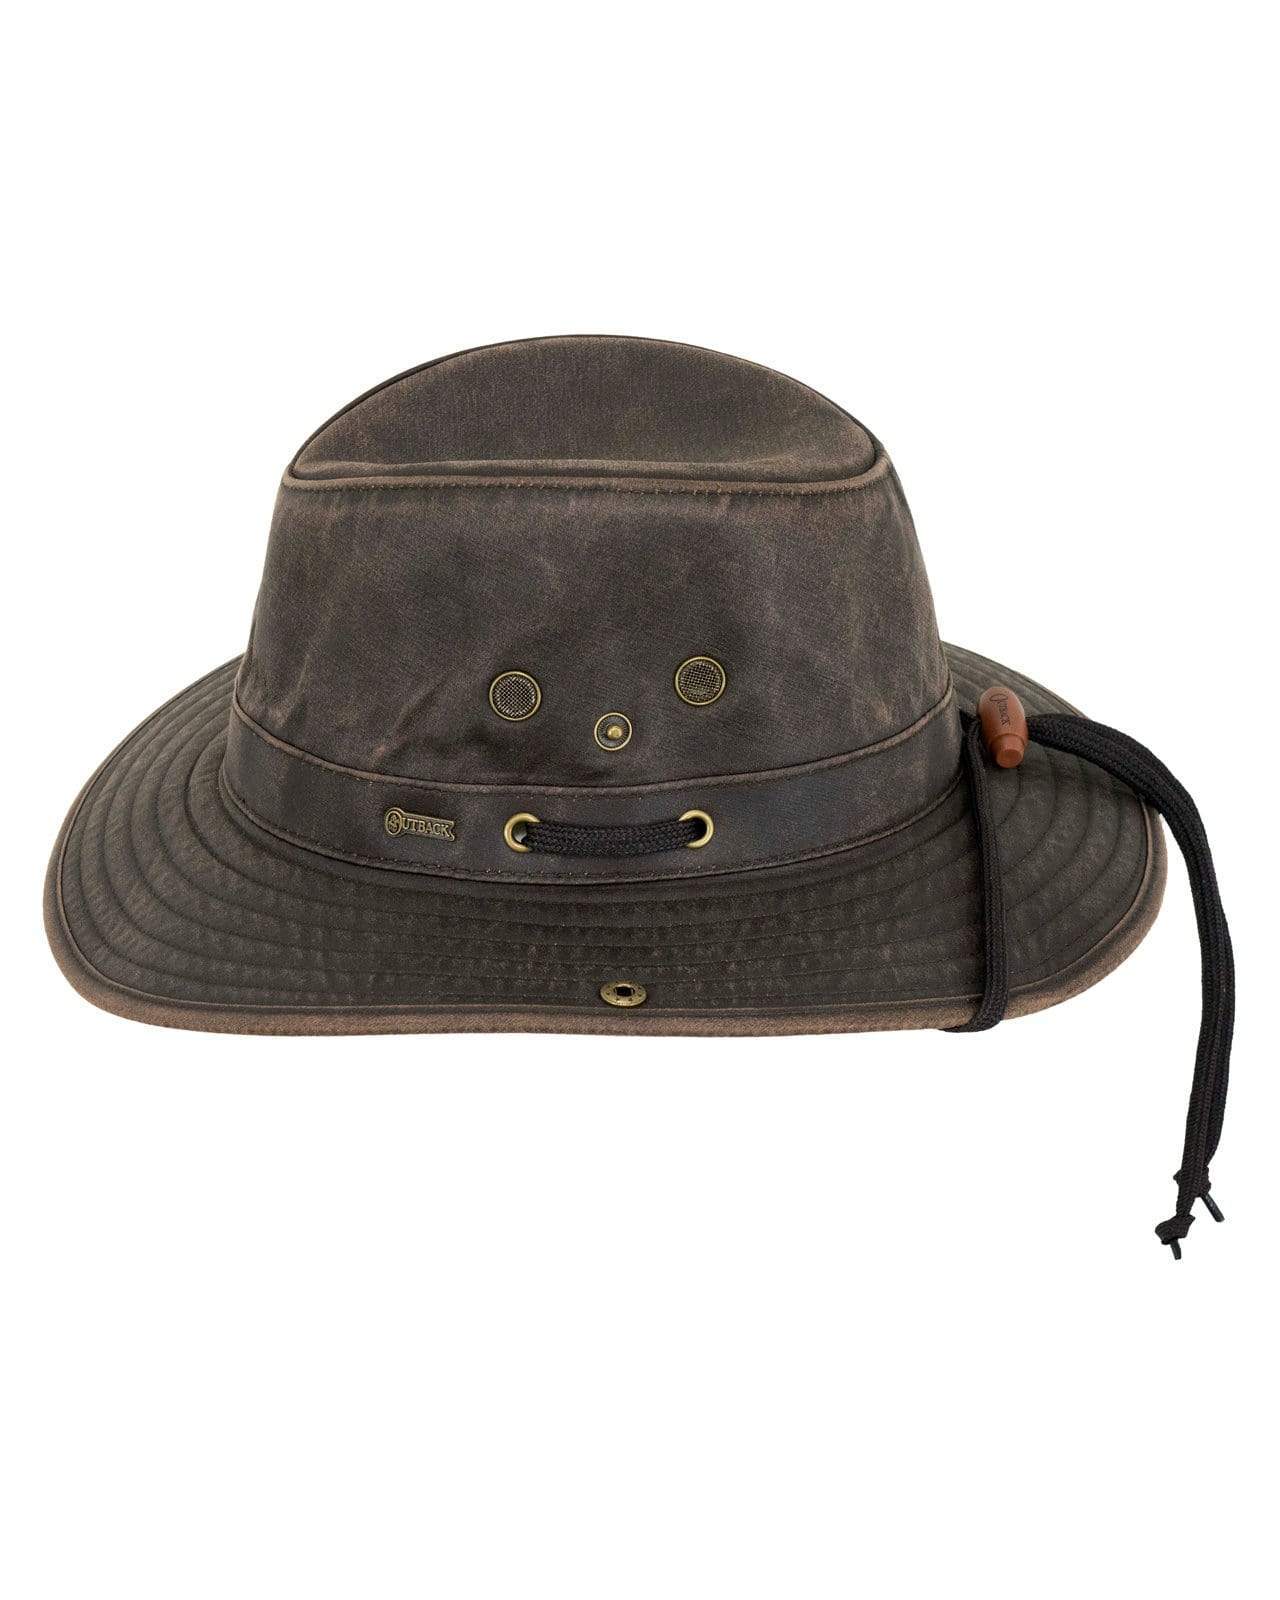 Outback Trading Company Holly Hill Hats